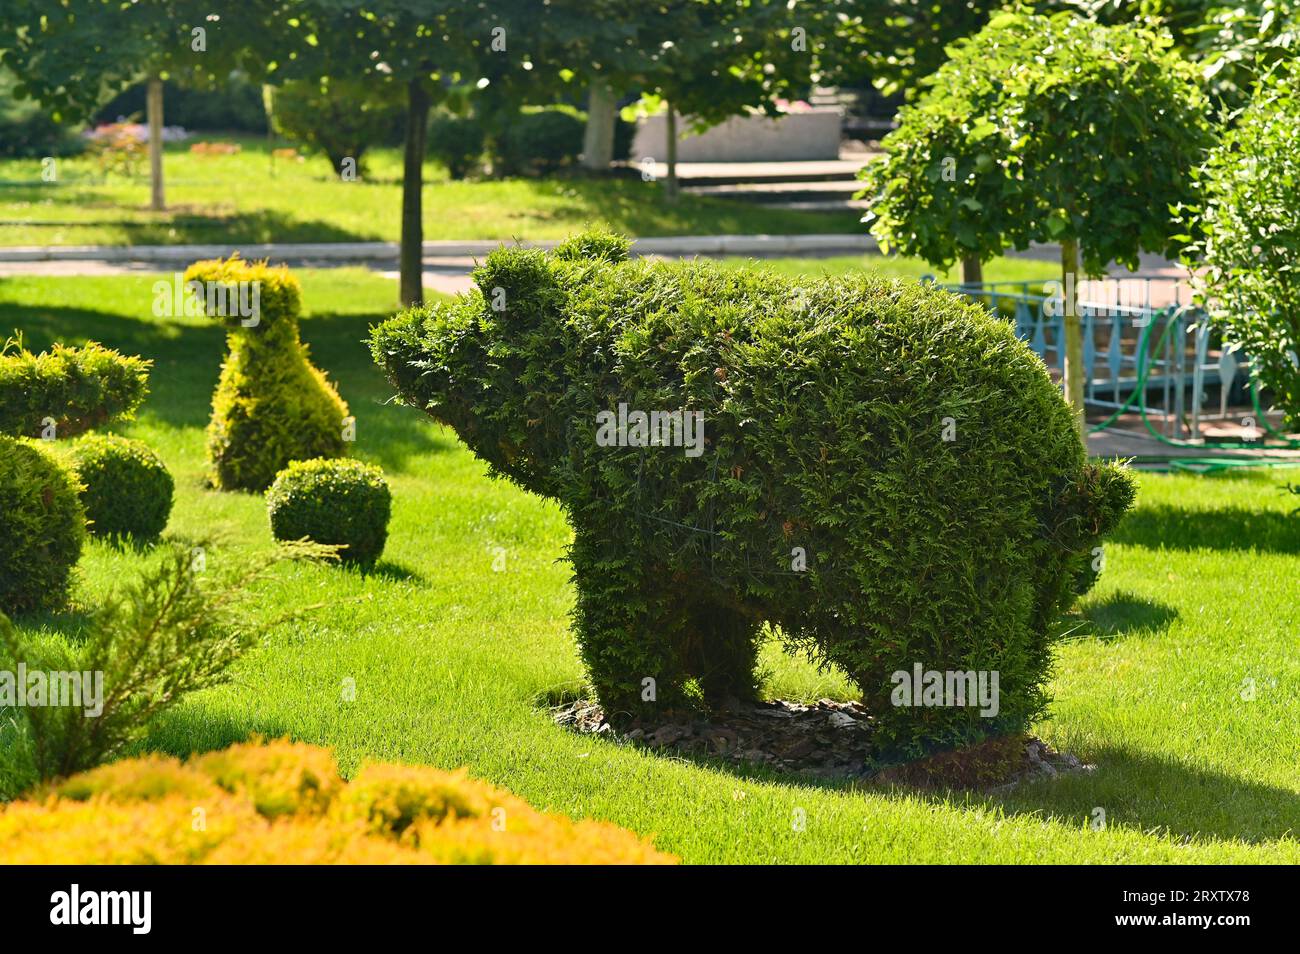 A boar created from bushes. Topiary trees. green grass. Stock Photo